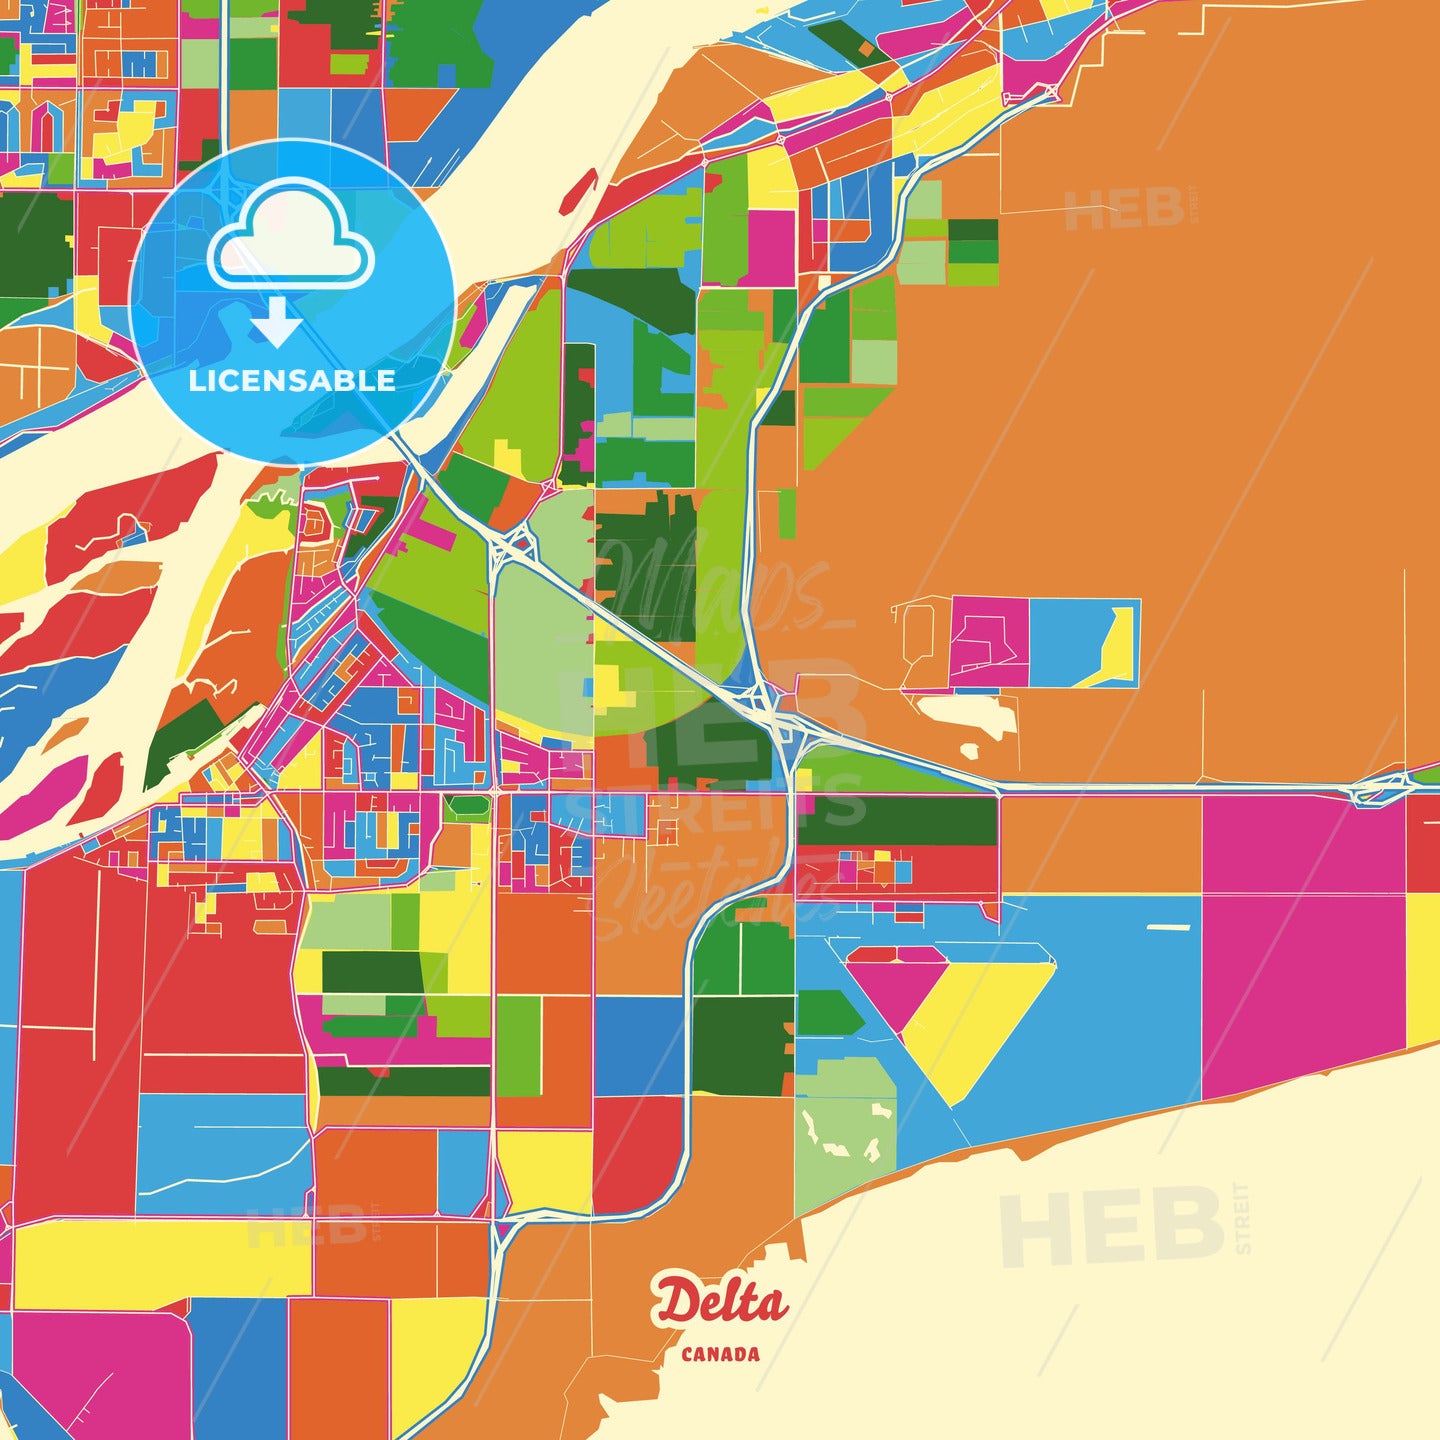 Delta, Canada Crazy Colorful Street Map Poster Template - HEBSTREITS Sketches